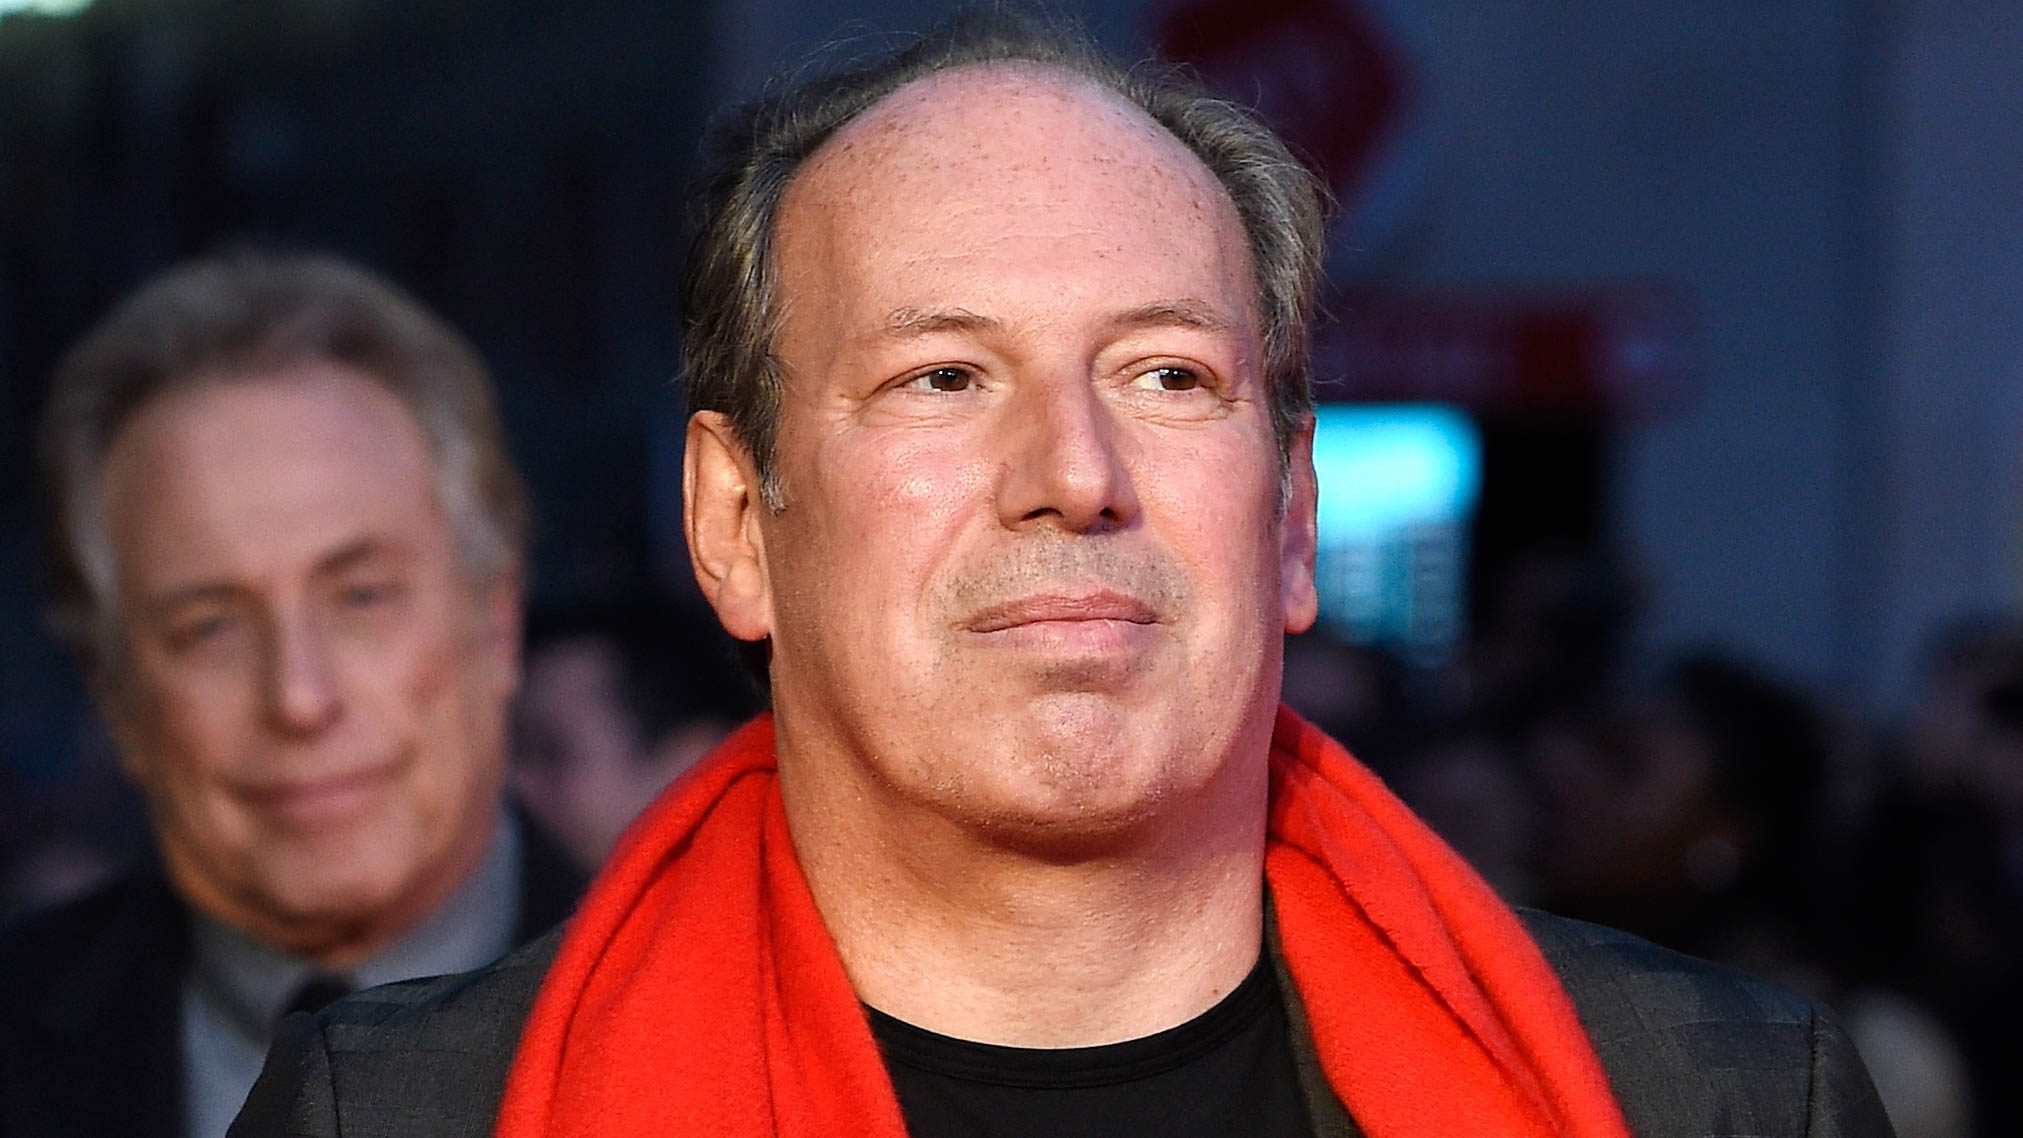 Hans Zimmer ‘retires’ from composing for superhero movies